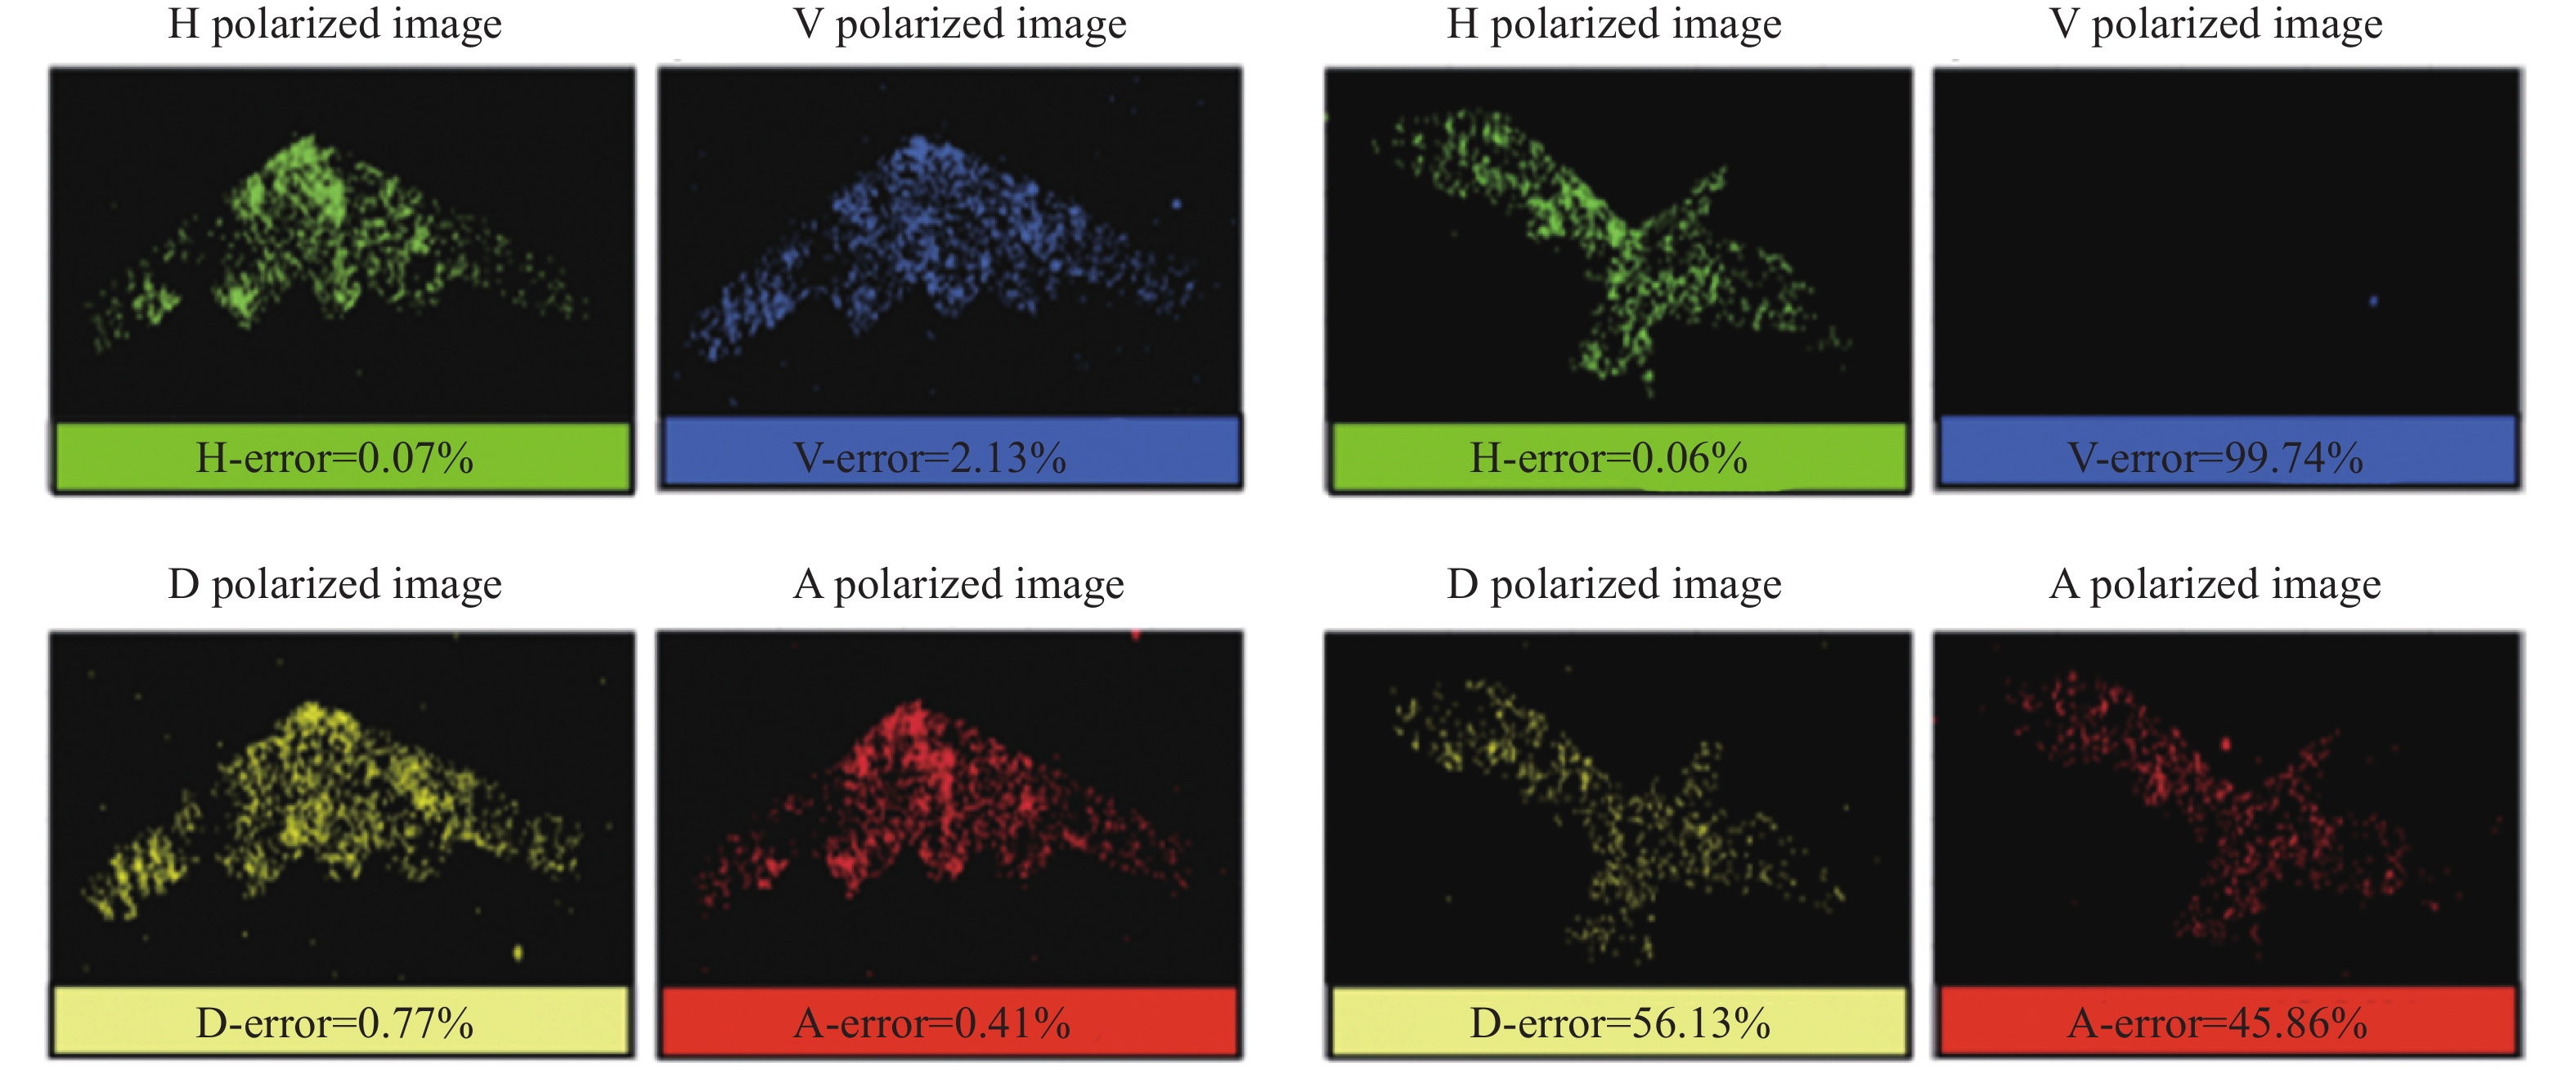 Imaging results in each polarization state with or without deception[1]